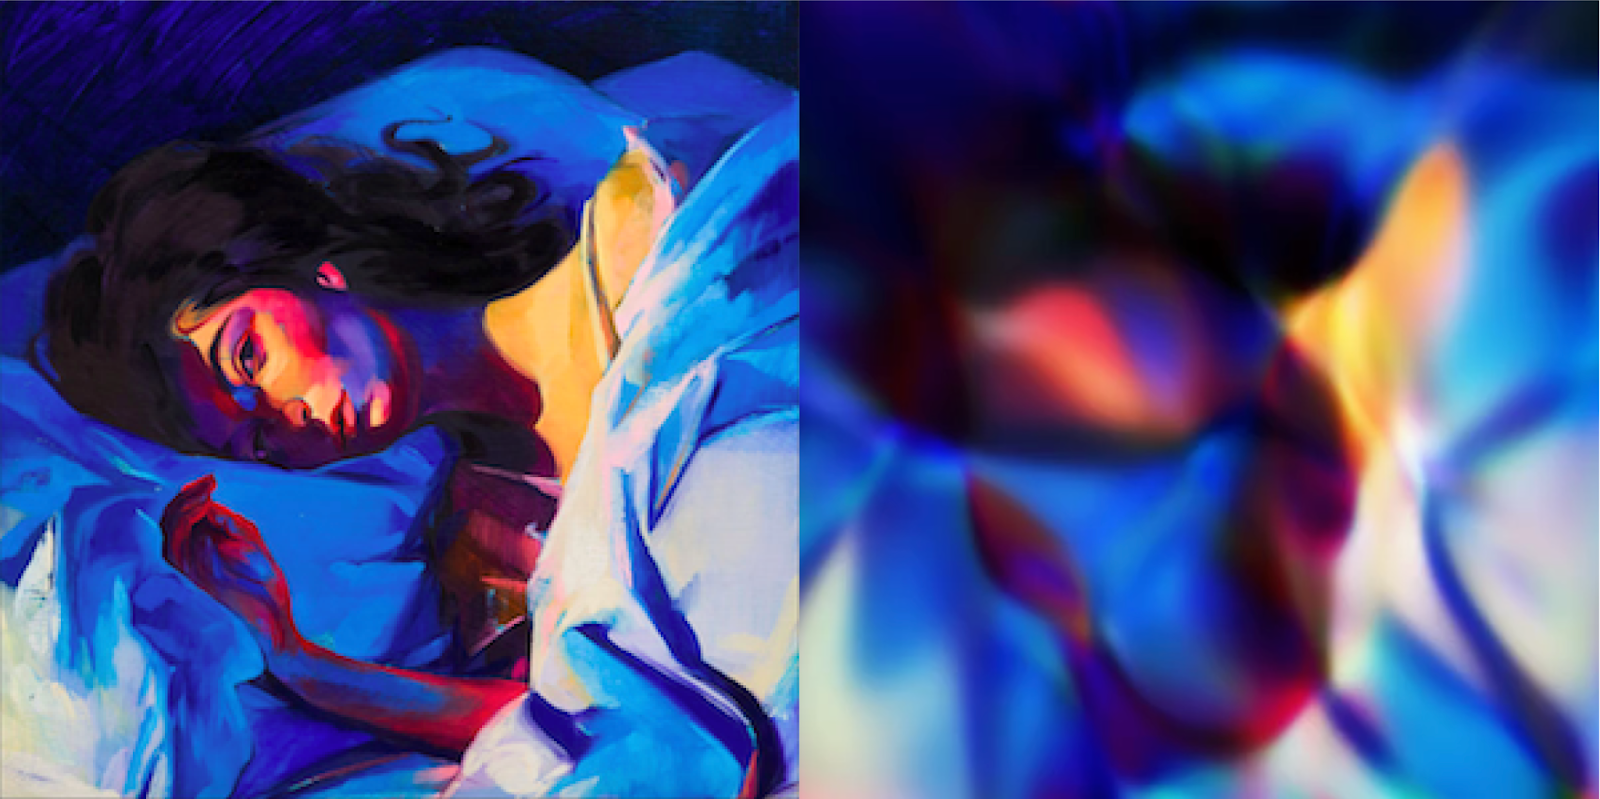 Left: reference image (album cover of Lorde’s Melodrama), right: image generated by corresponding trained CPPN.